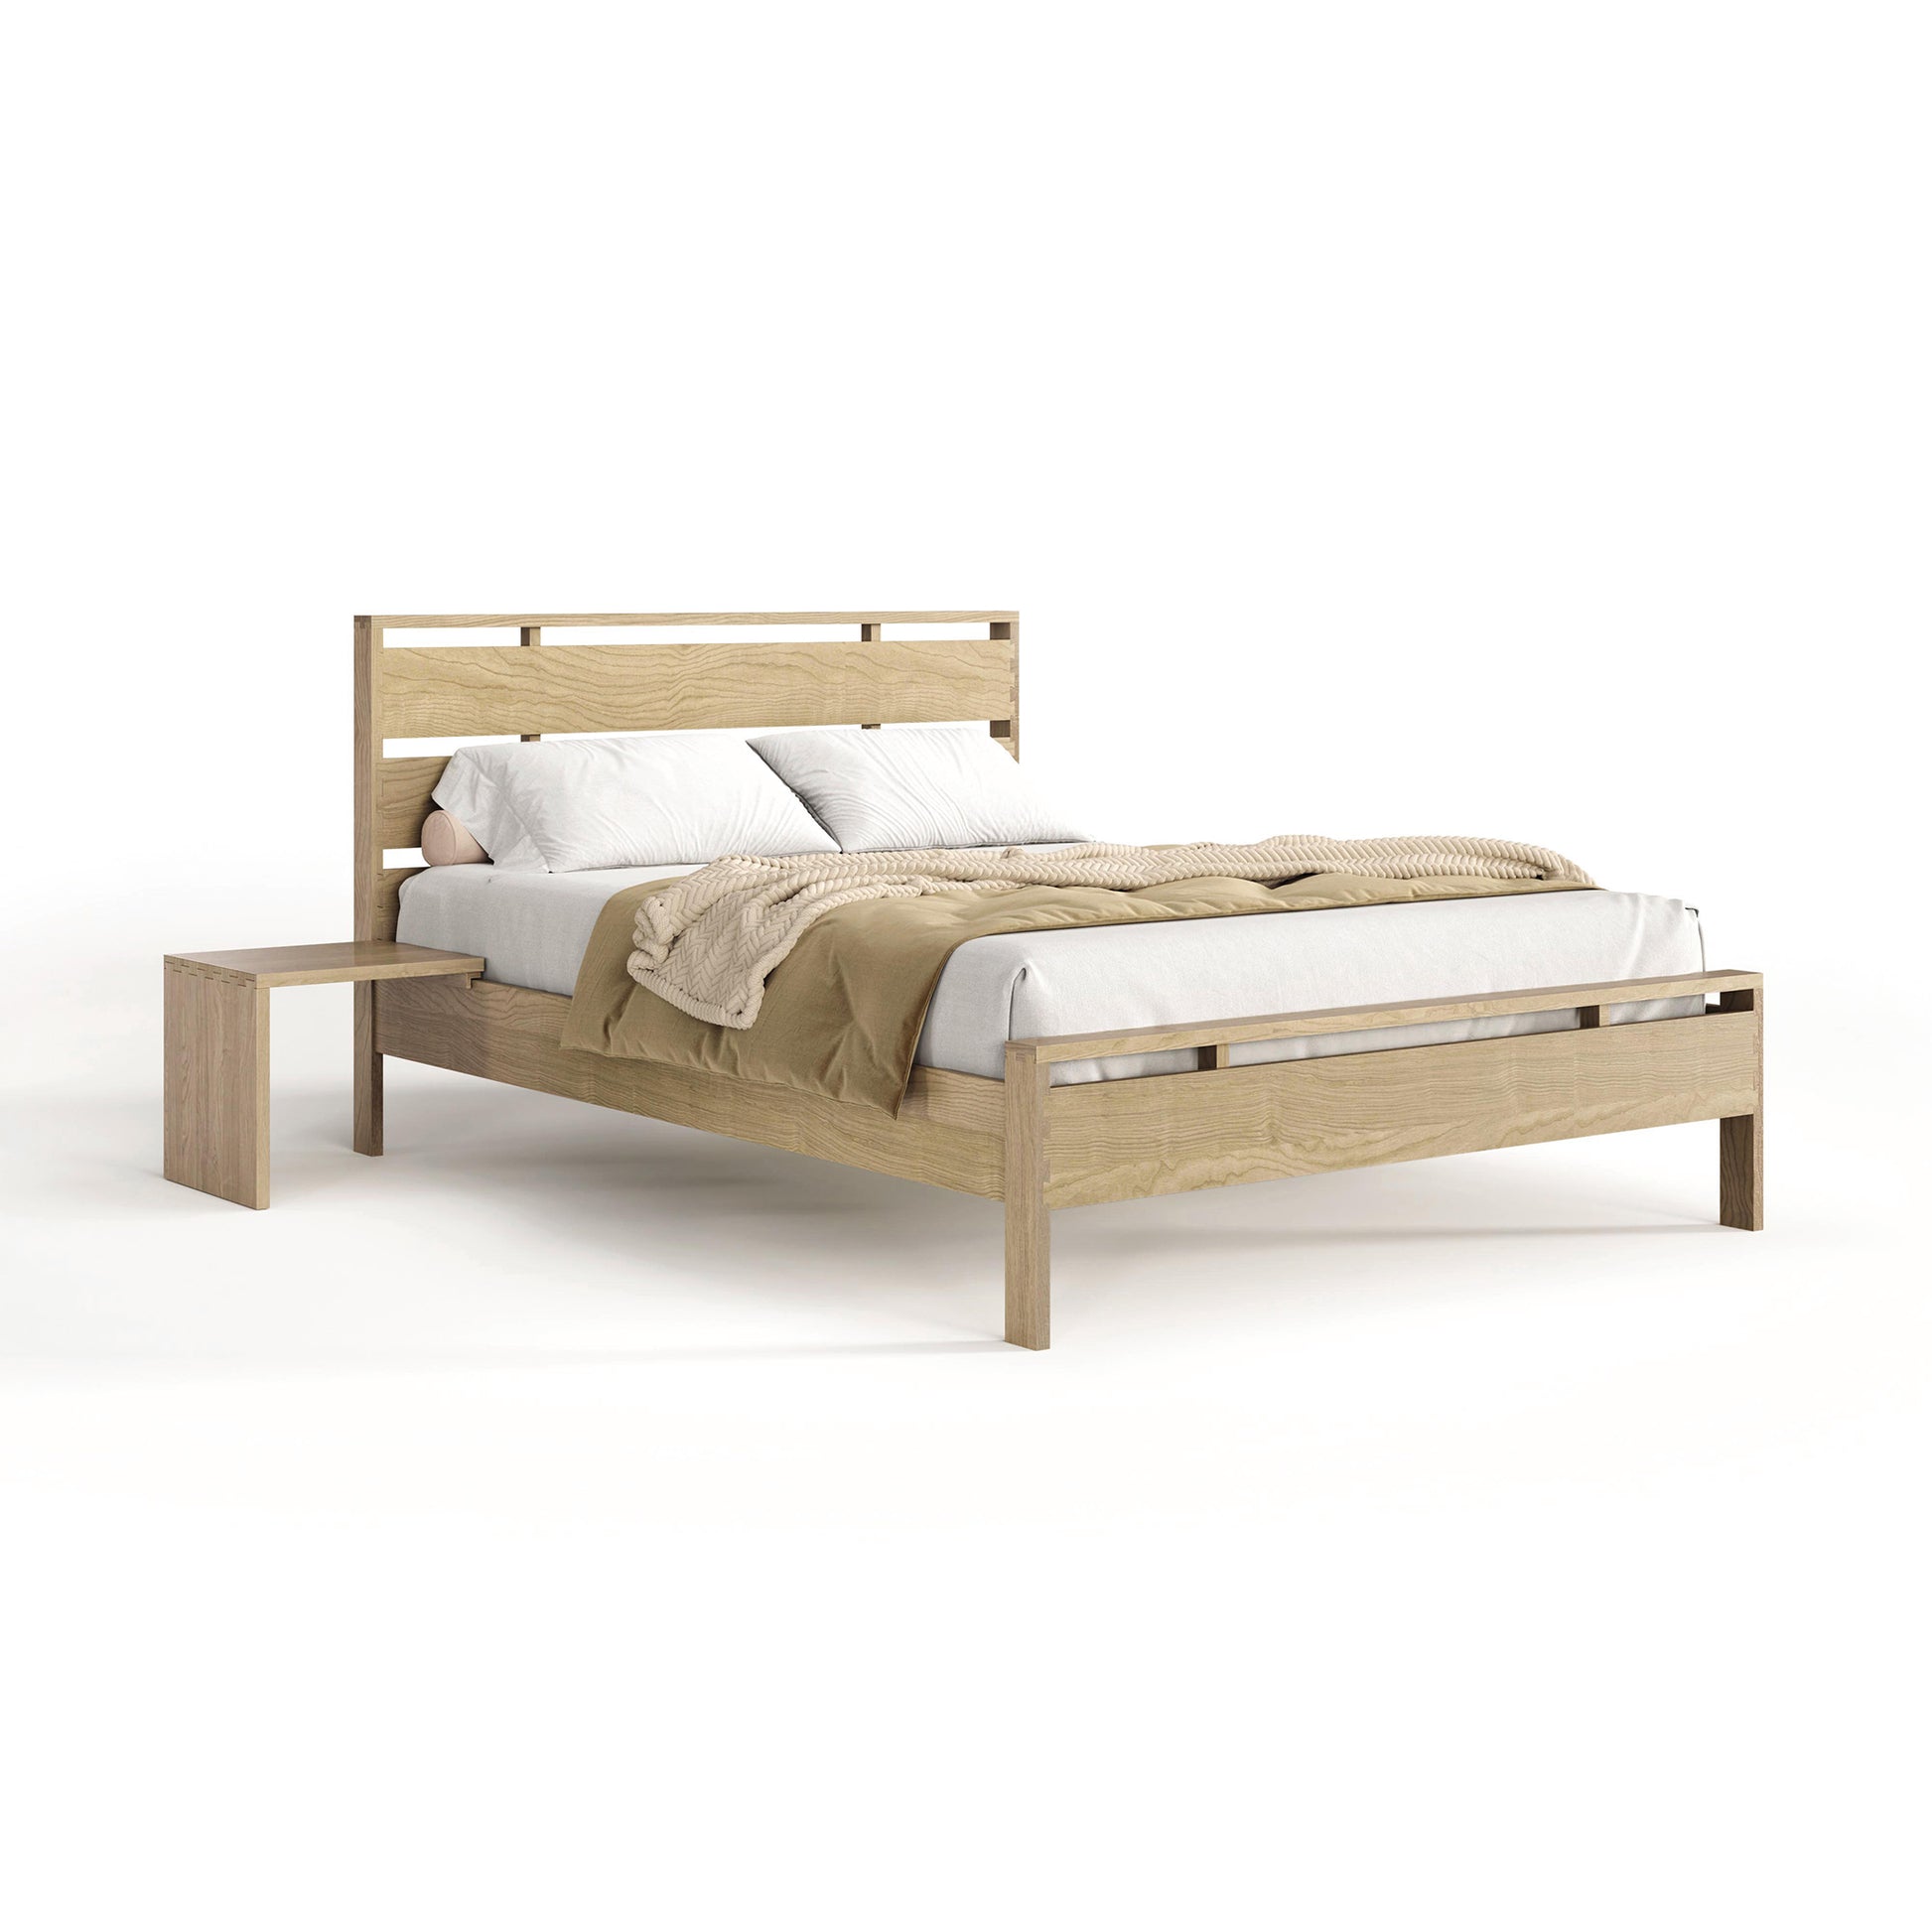 An Oslo Platform Bed by Copeland Furniture, crafted from solid oak hardwood, with an attached nightstand, showcasing a neutral-toned bedding set.